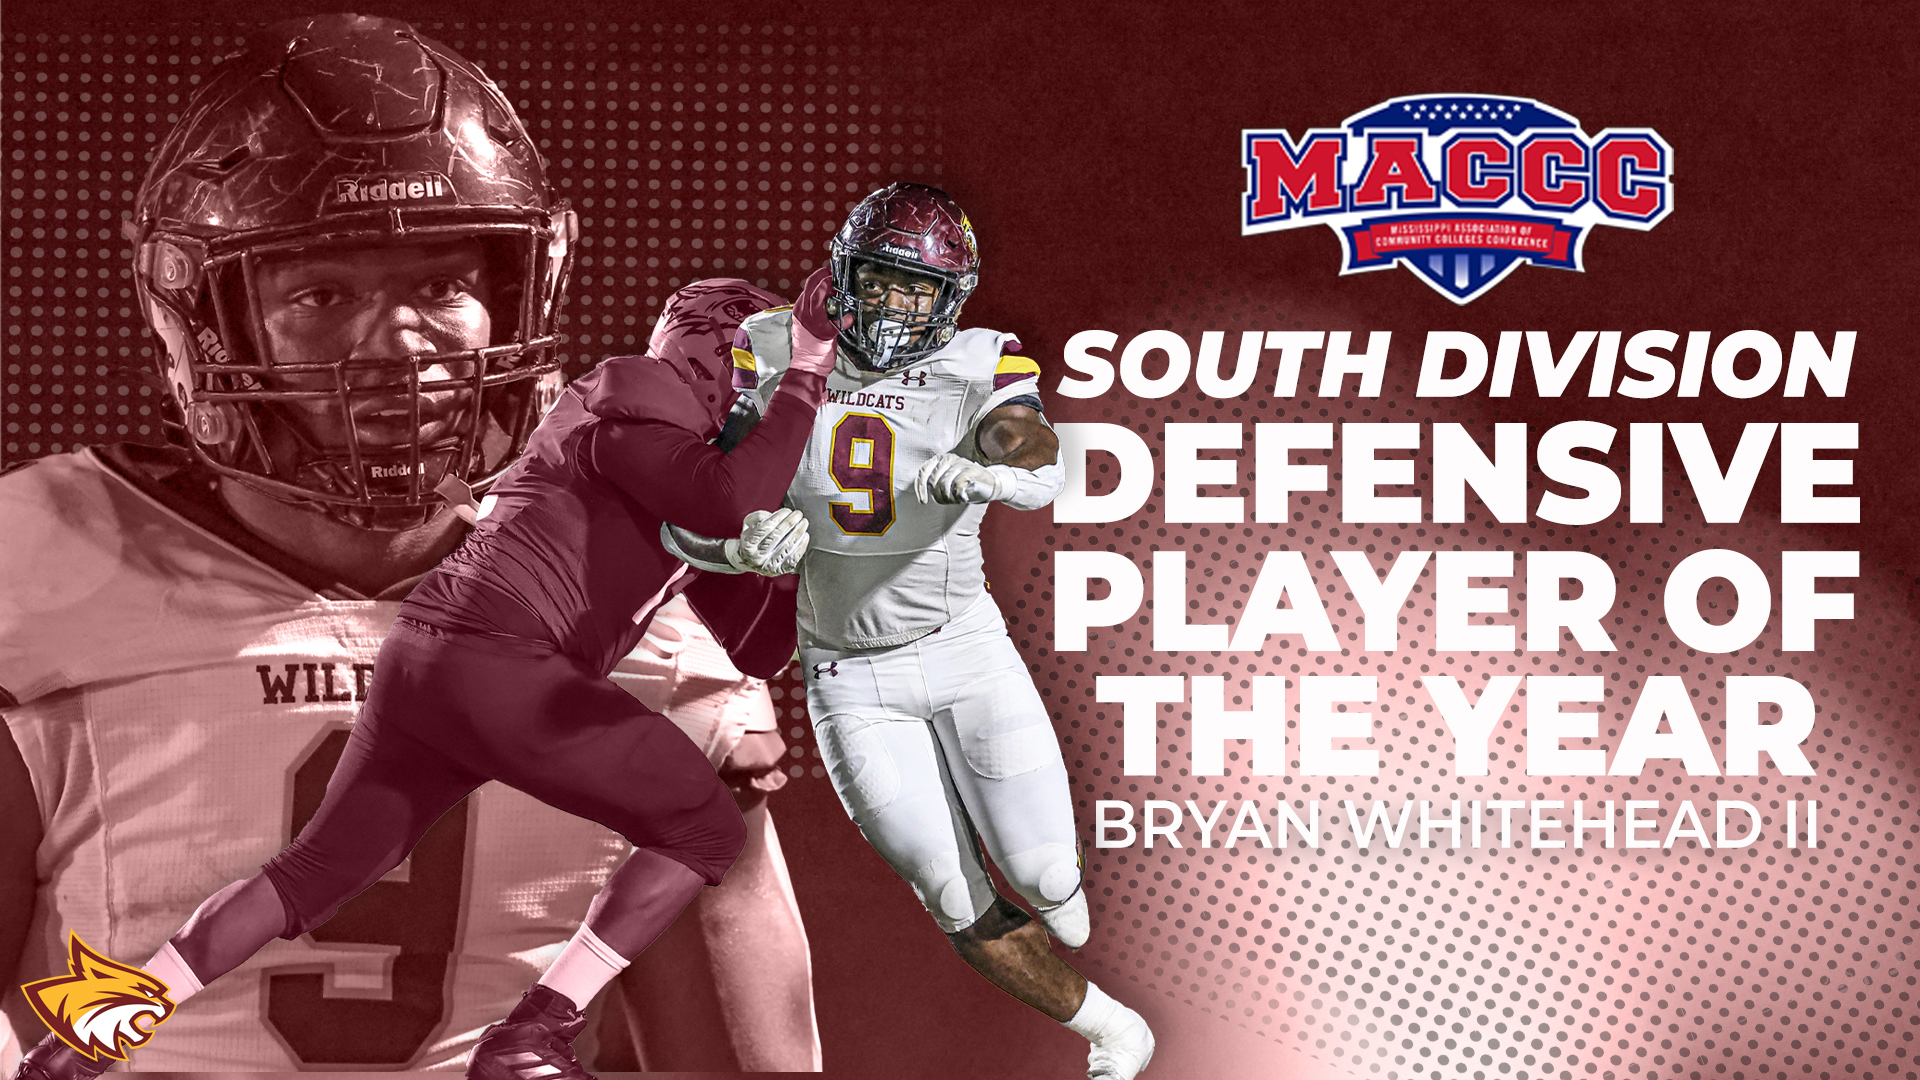 Pearl River's Bryan Whitehead II named MACCC South Division Defensive Player of the Year